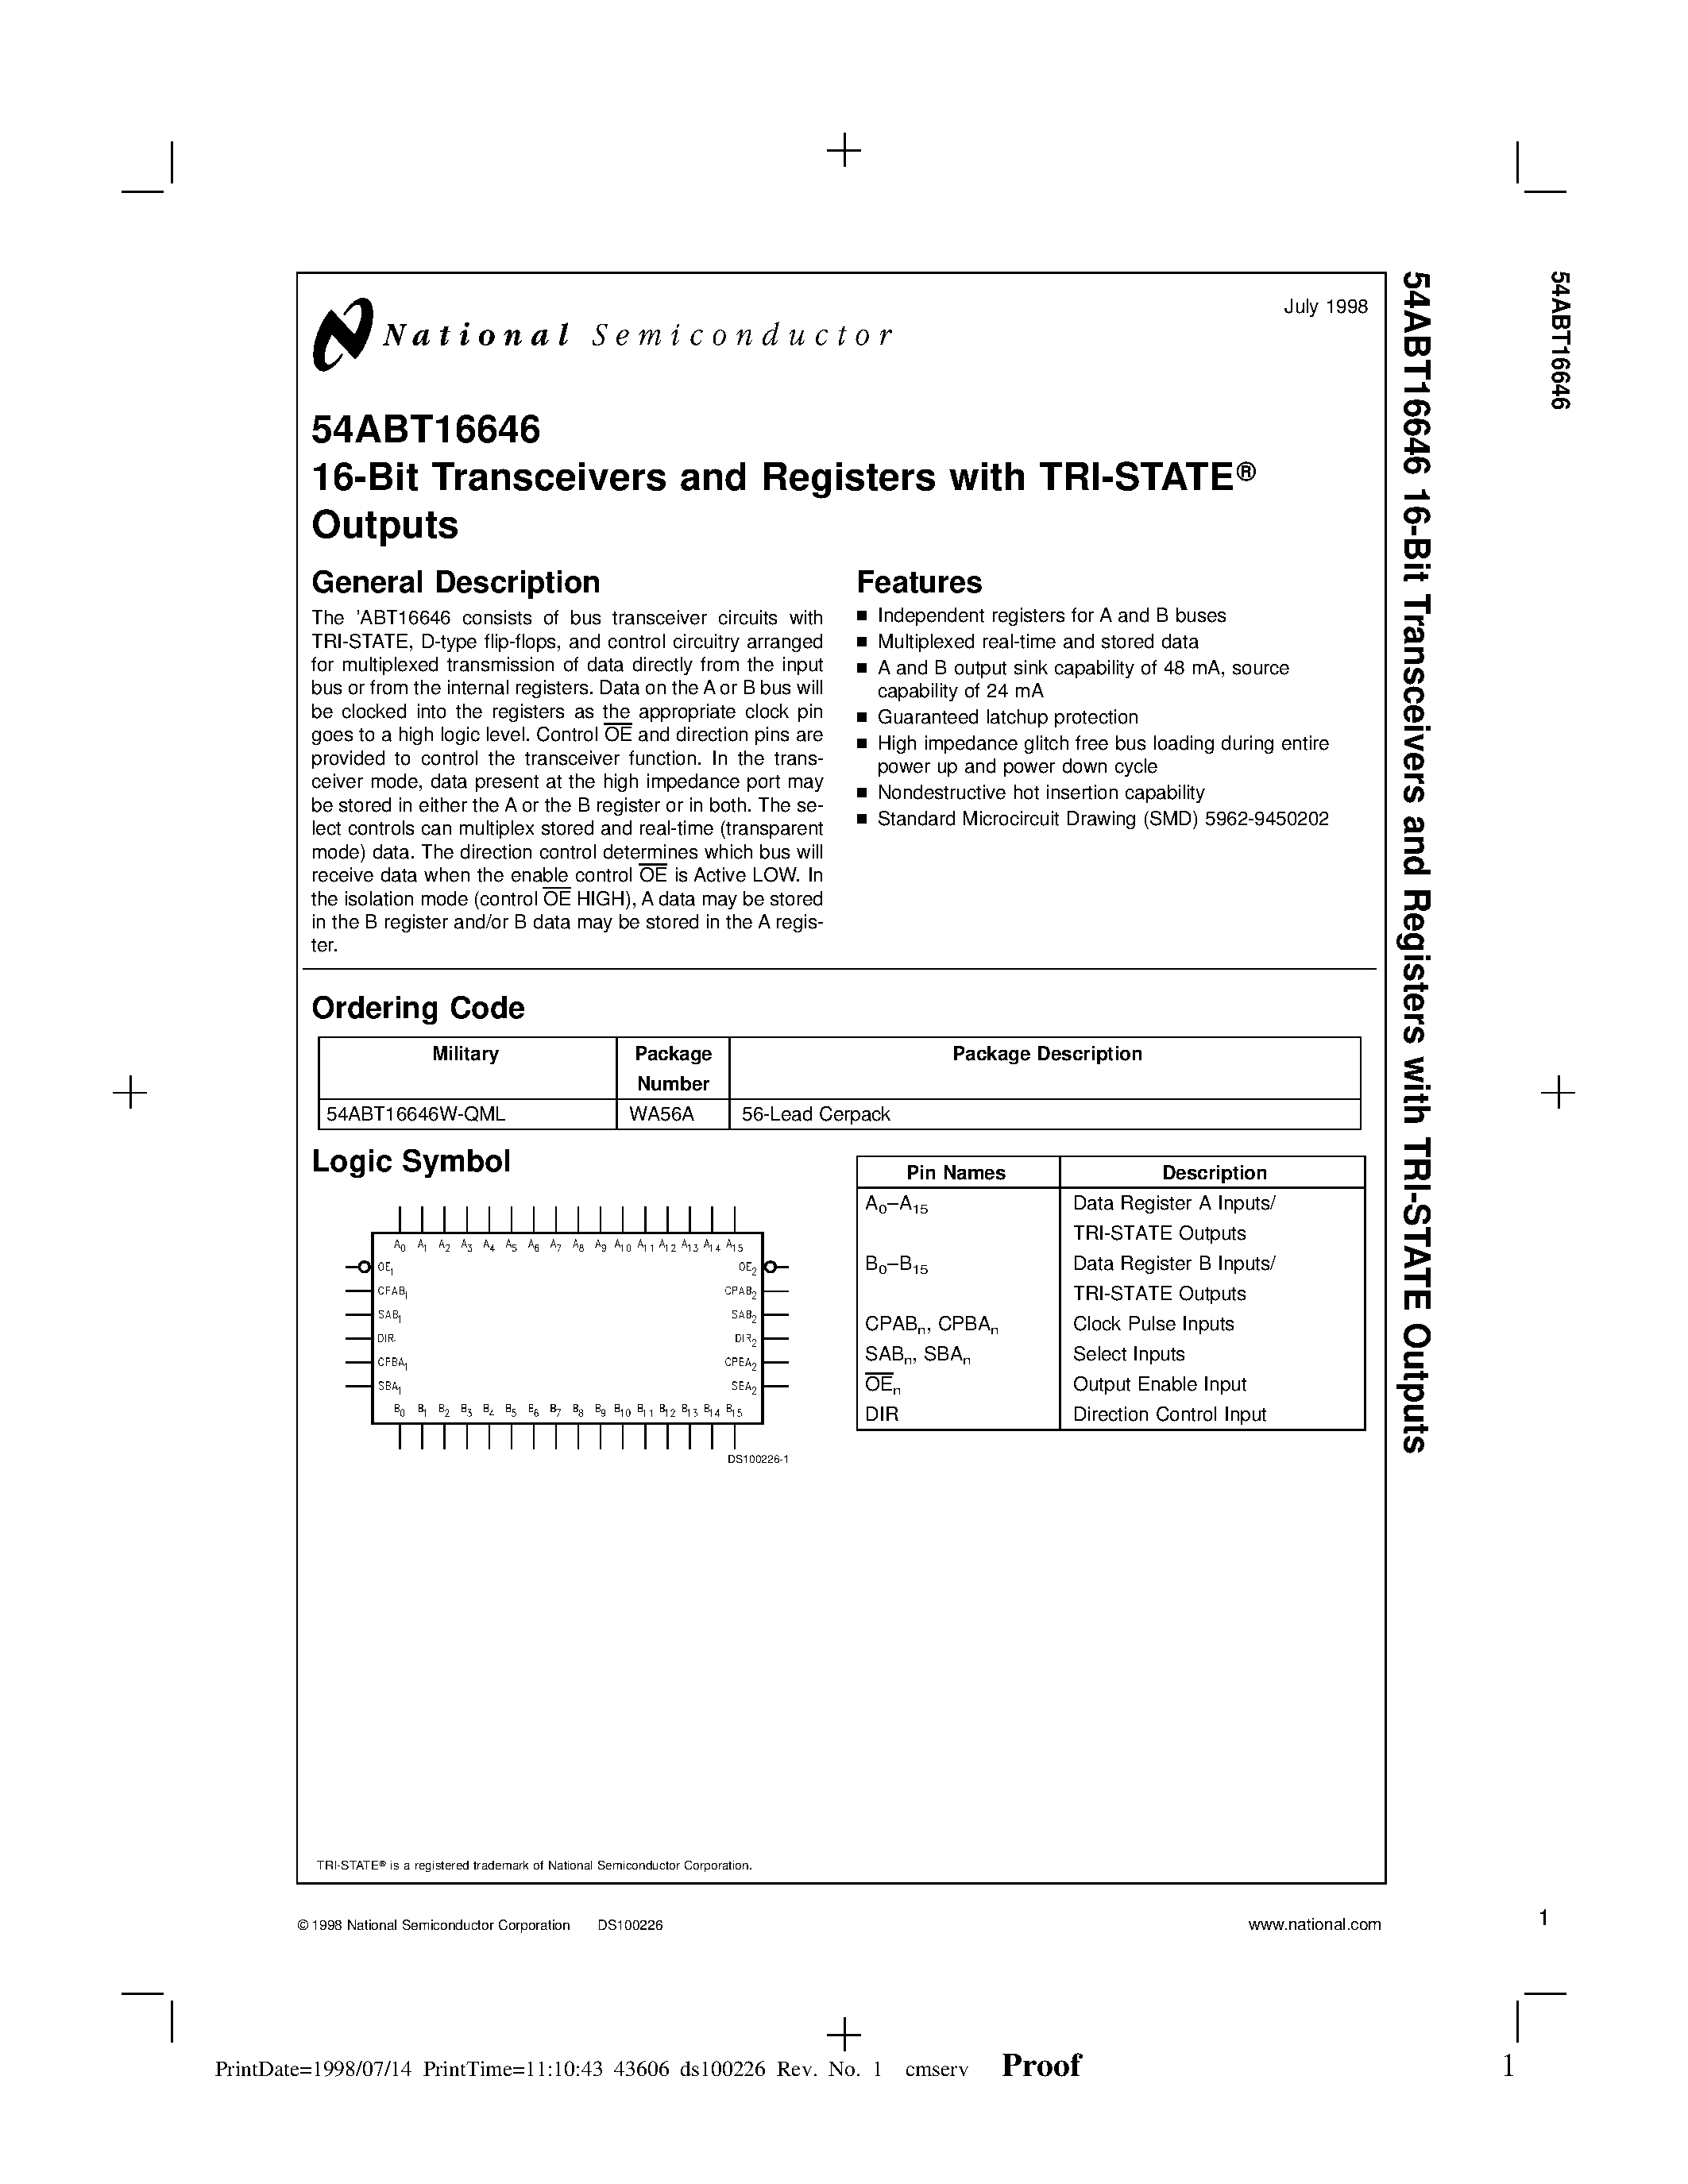 Даташит 54ABT16646 - 16-Bit Transceivers and Registers with TRI-STATE Outputs страница 1